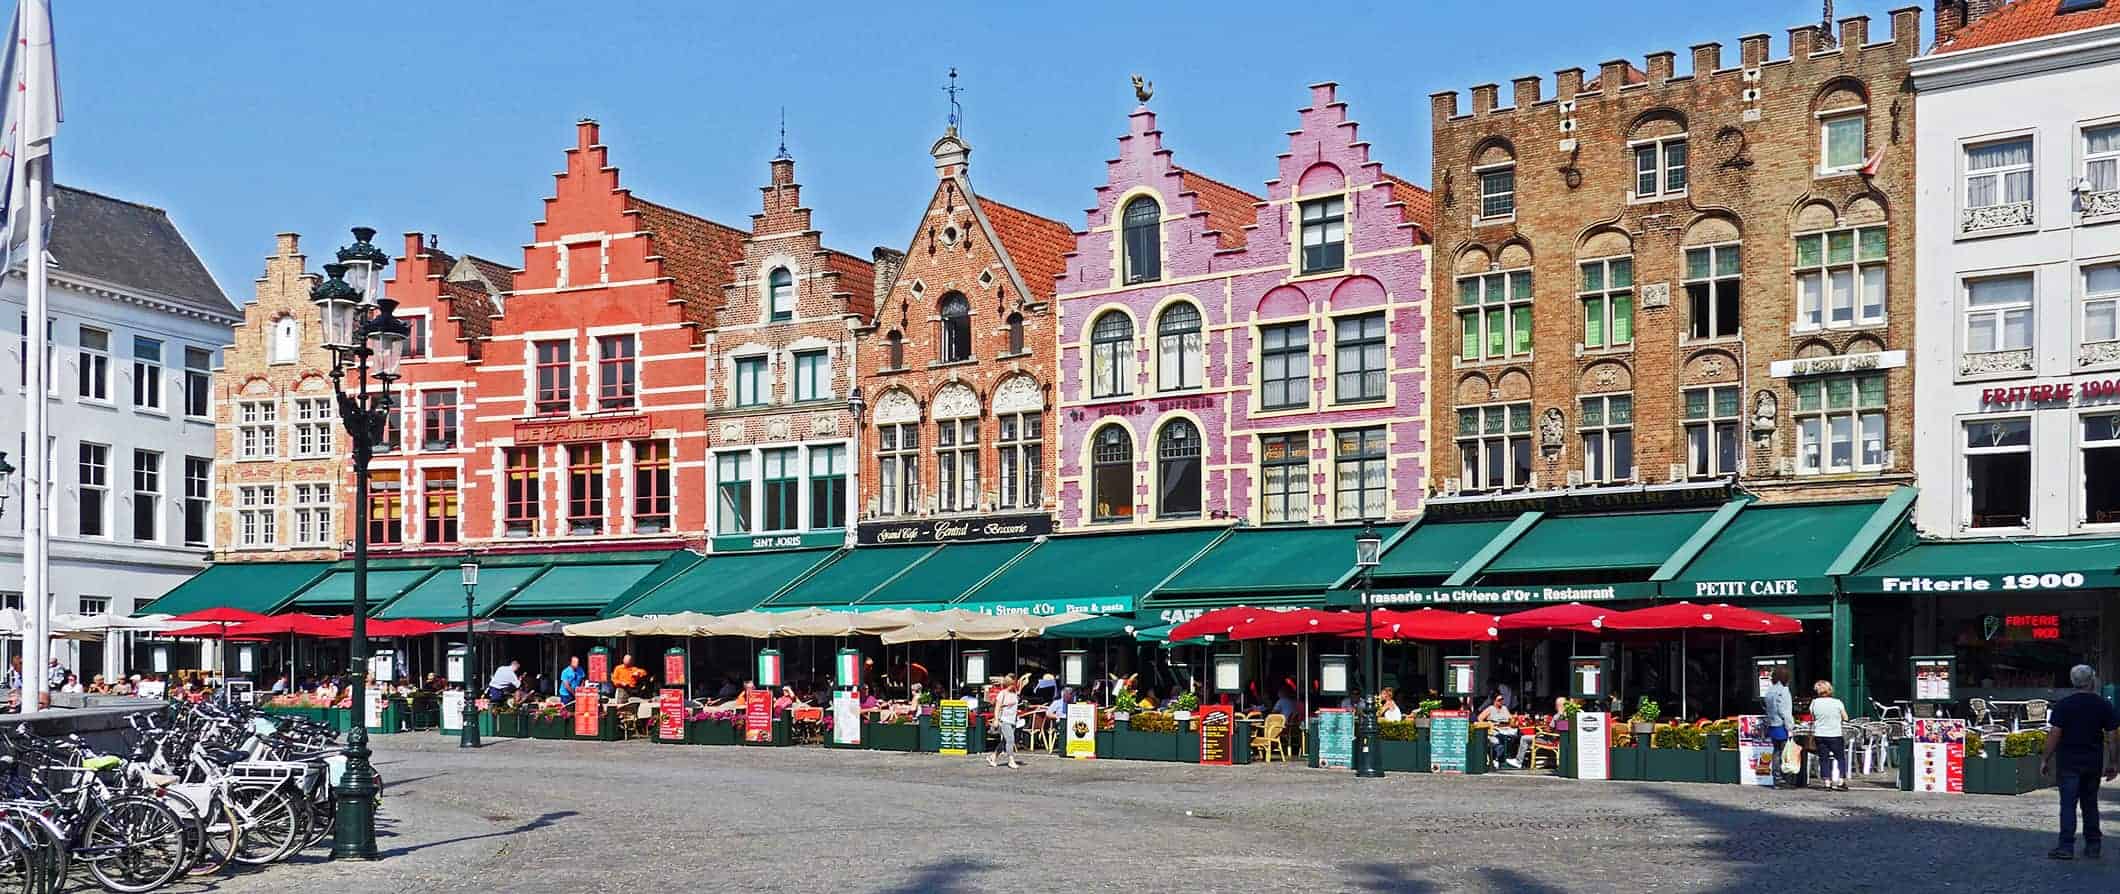 A colorful street of old row houses in Bruges, Belgium near a square full of people